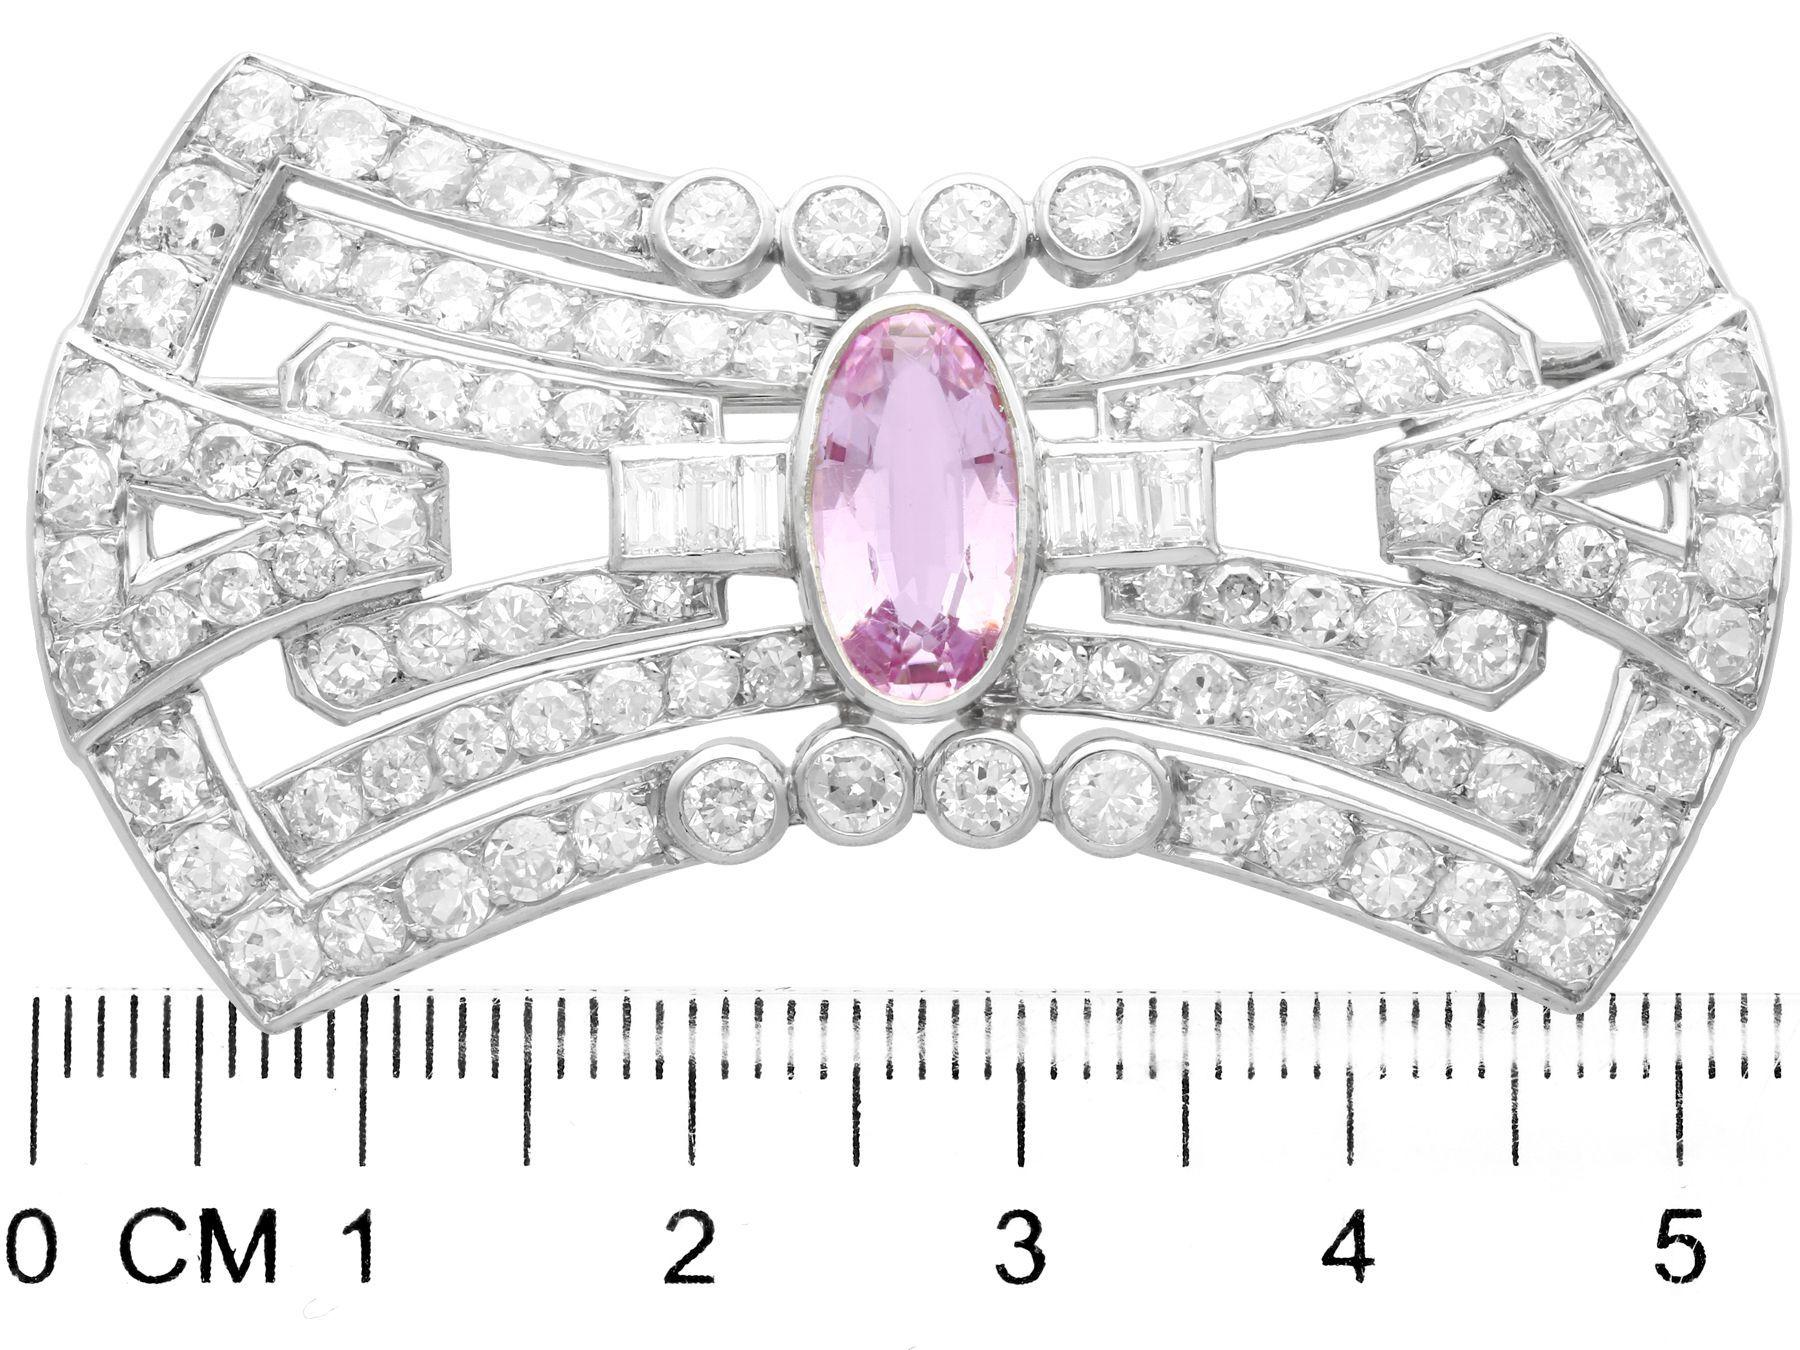 Antique French 3.08 Carat Pink Topaz and 7.02 Carat Diamond and Platinum Brooch For Sale 2